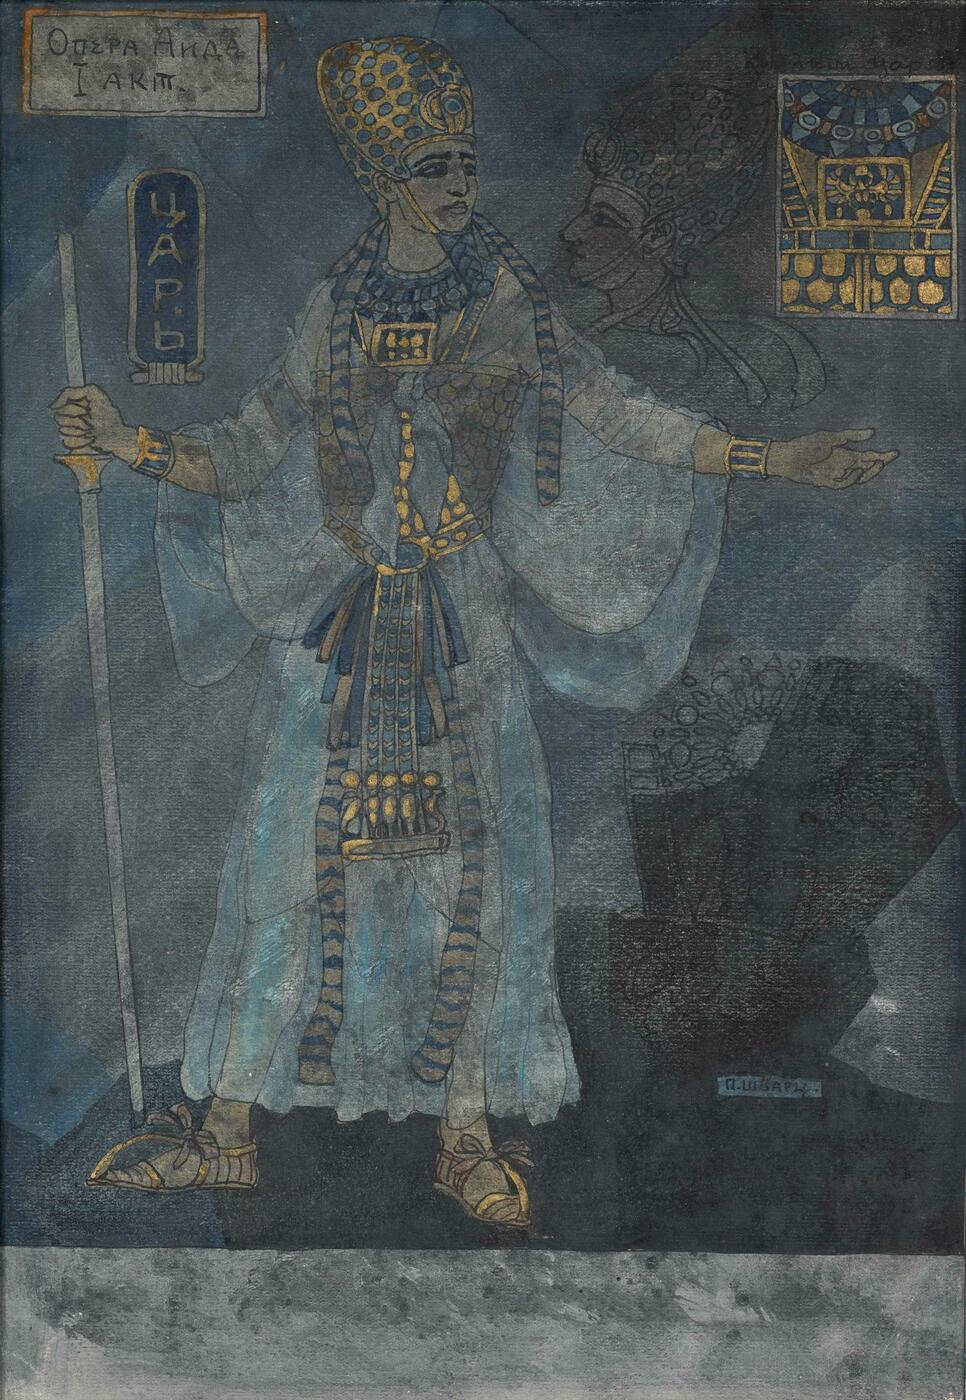 Costume Design for the Pharaoh from "Aida", First Act